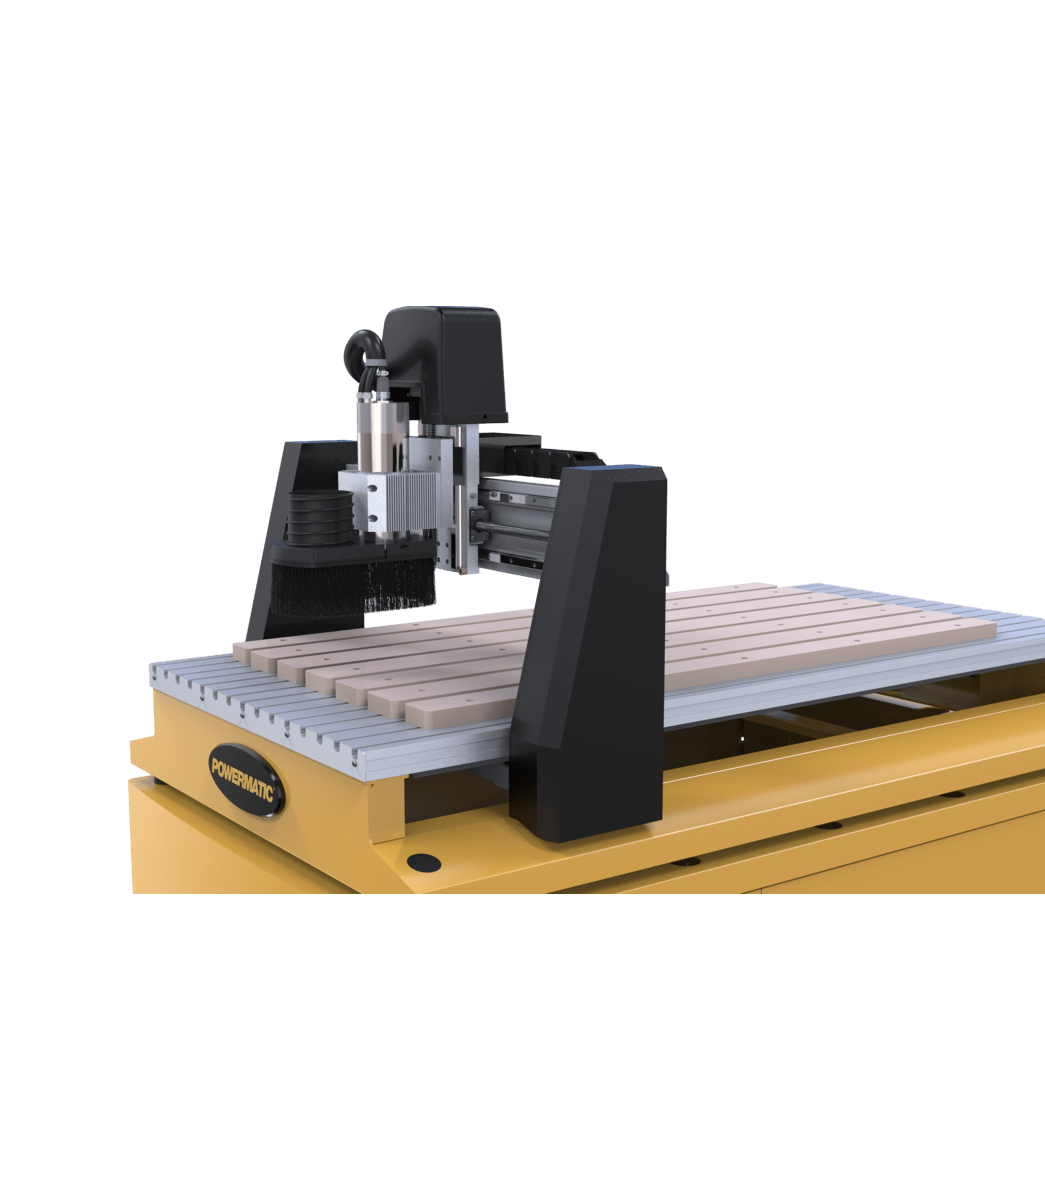 CNC Kit with Electro Spindle | PM-2x4SPK - Powermatic